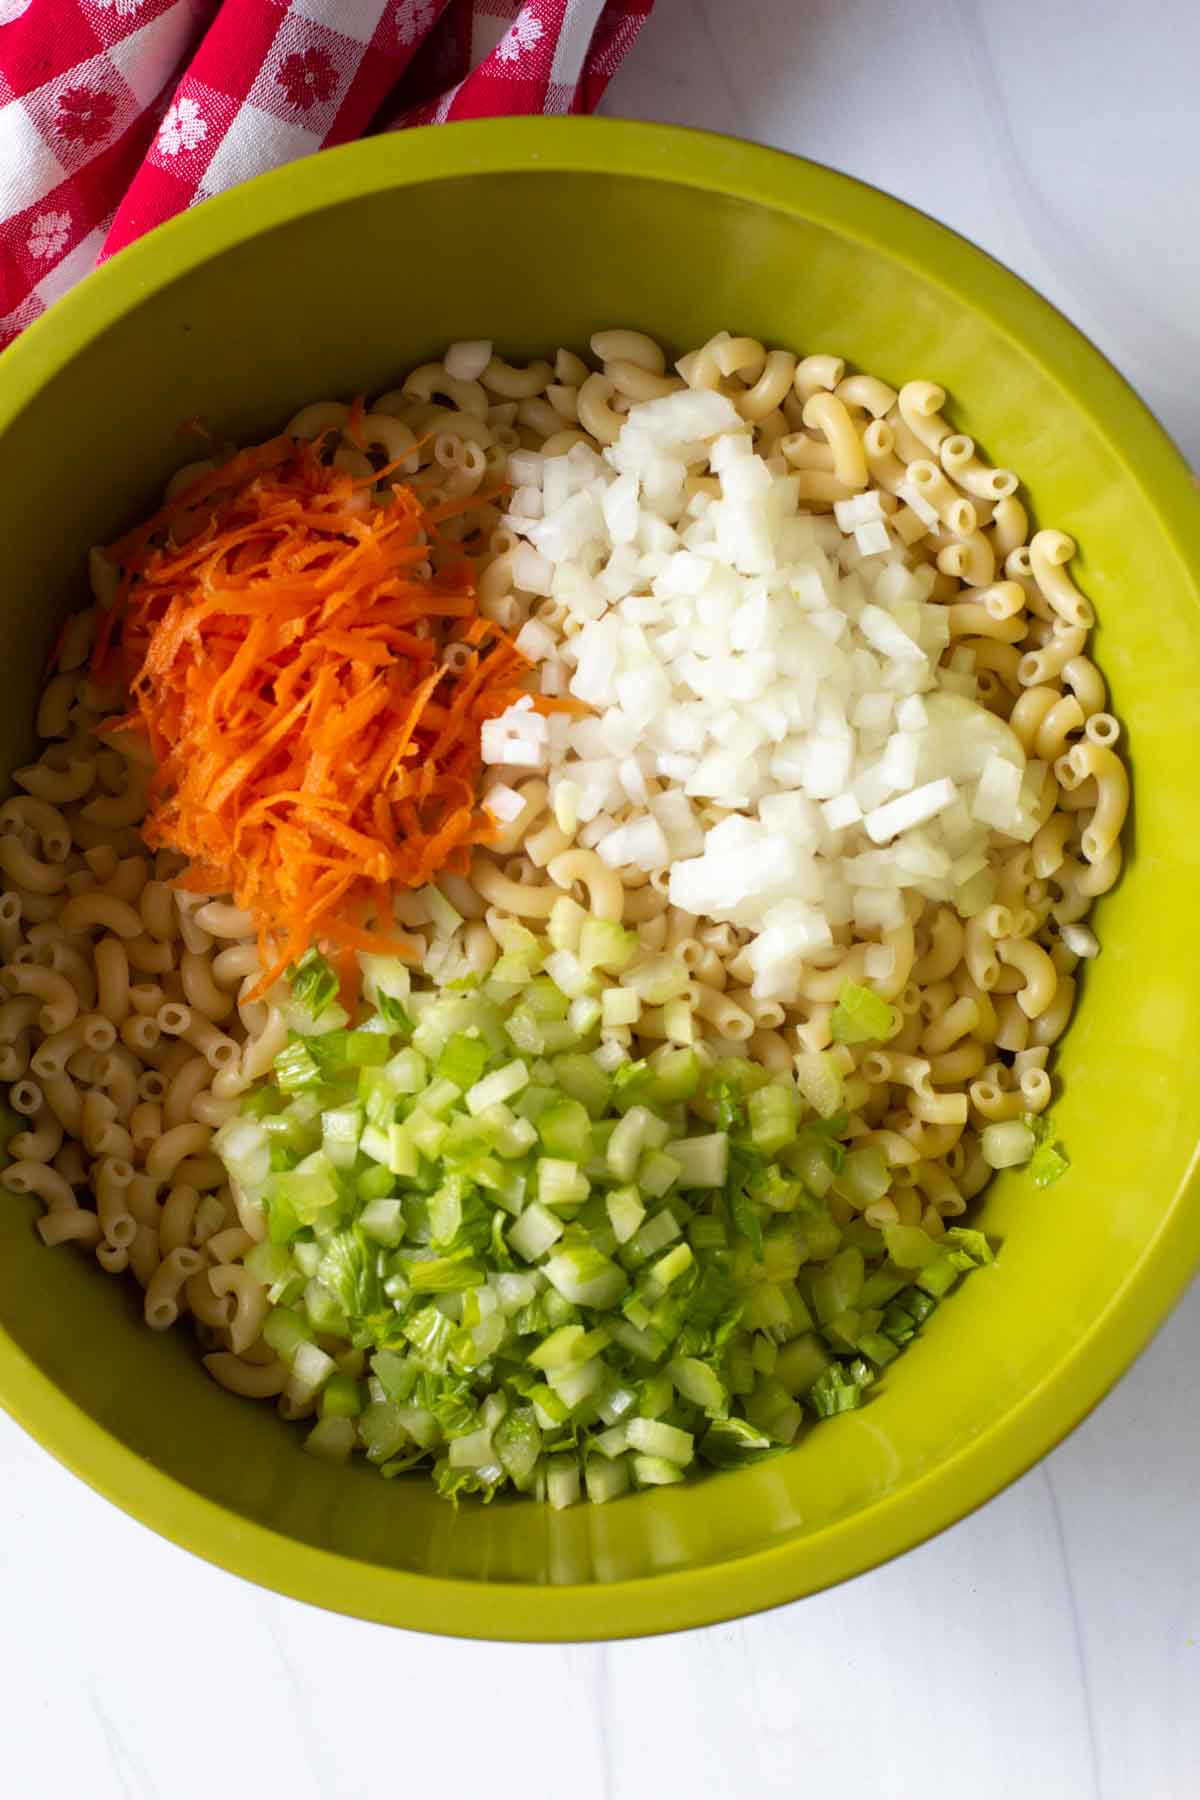 Adding onion, celery and carrot to macaroni noodles.